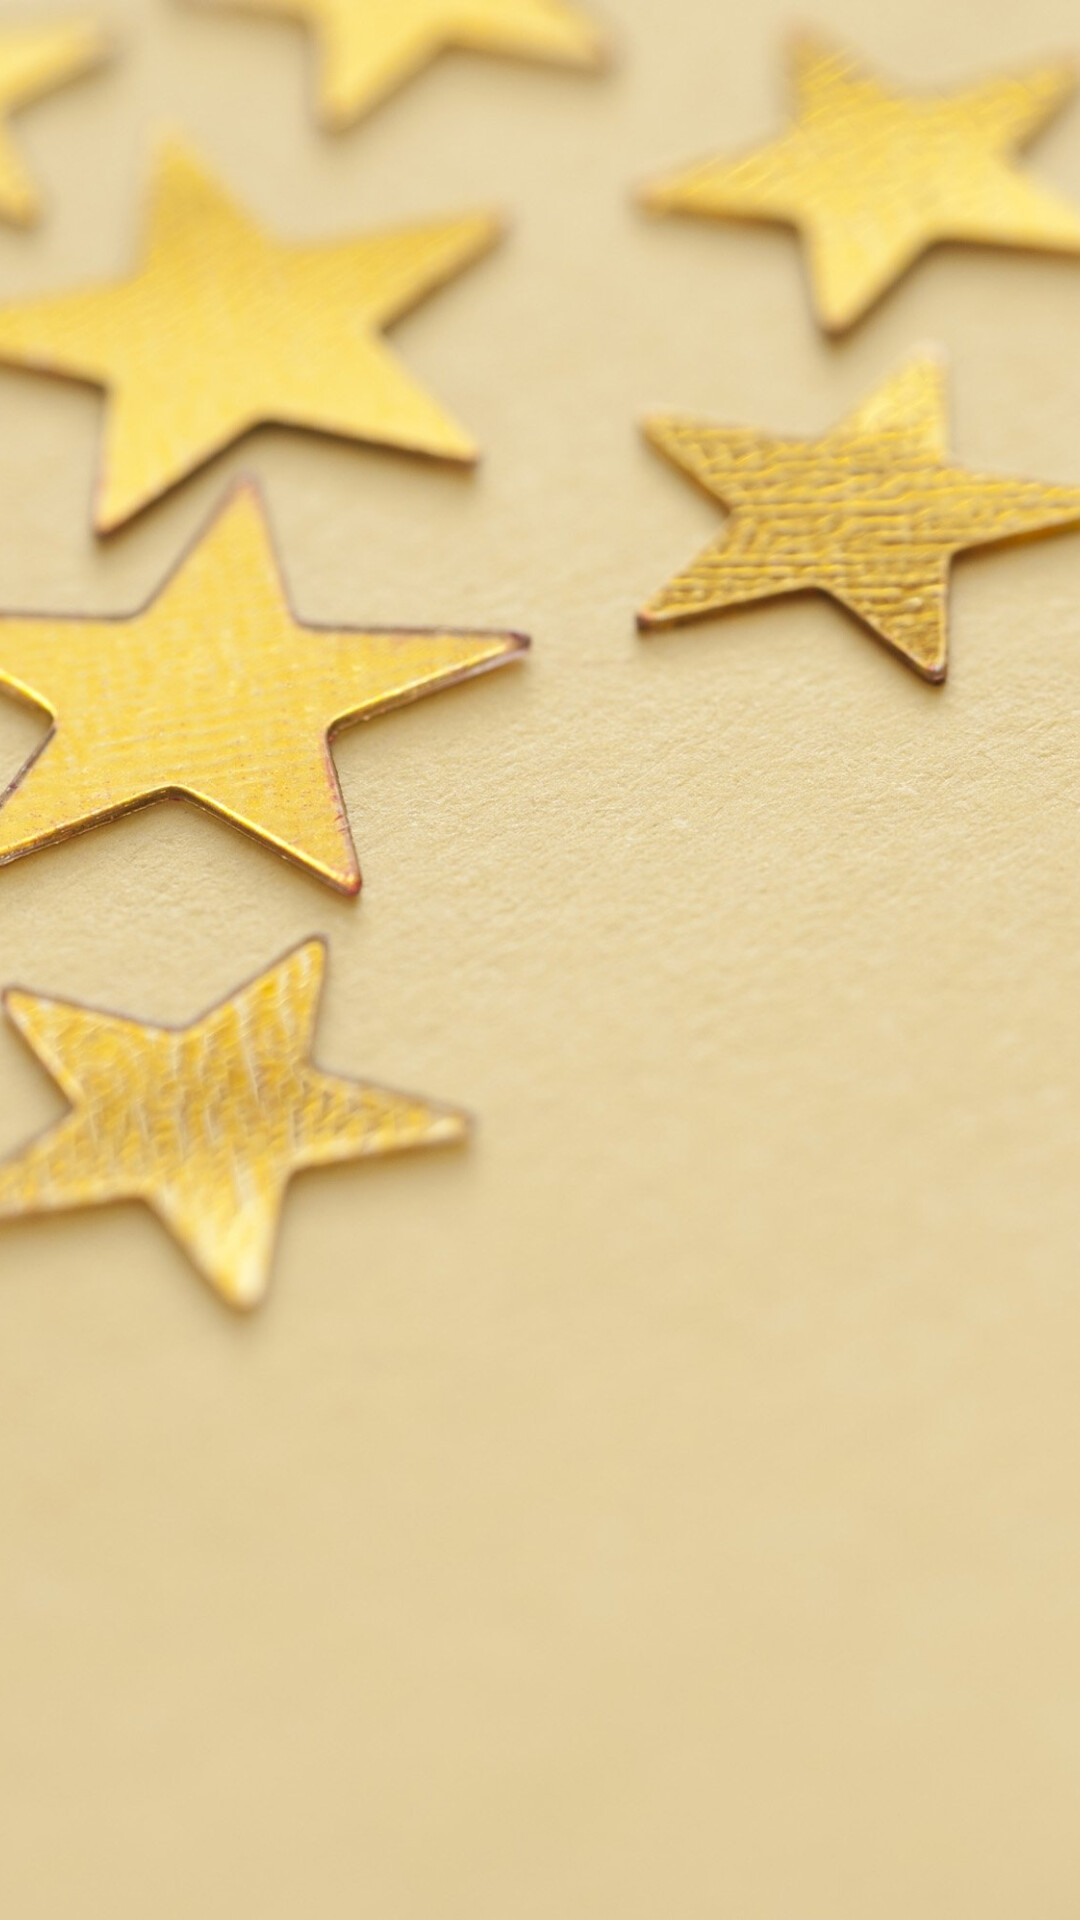 Gold Star: Simple hand-made stars for home decoration, Yellow geometric ornaments. 1080x1920 Full HD Background.